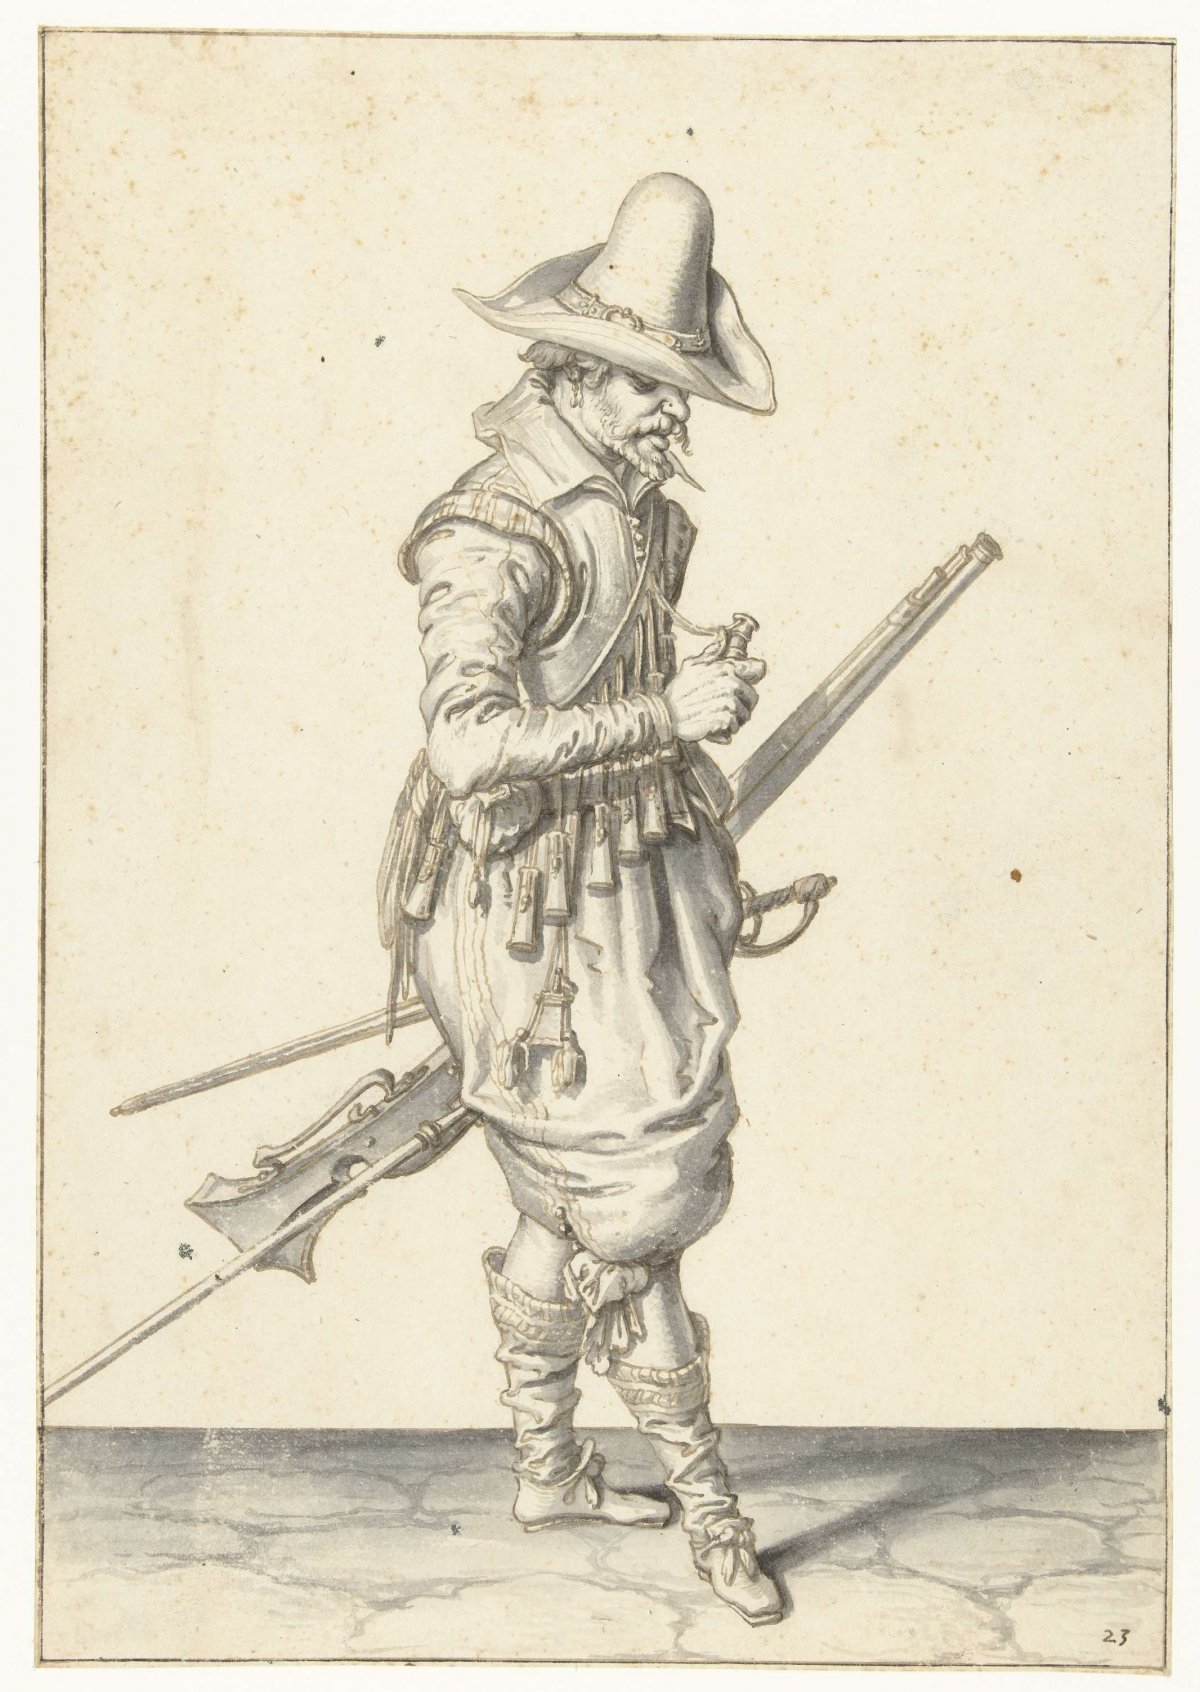 Soldier with a musket opening a powder measure, Jacques de Gheyn (II), 1596 - 1606